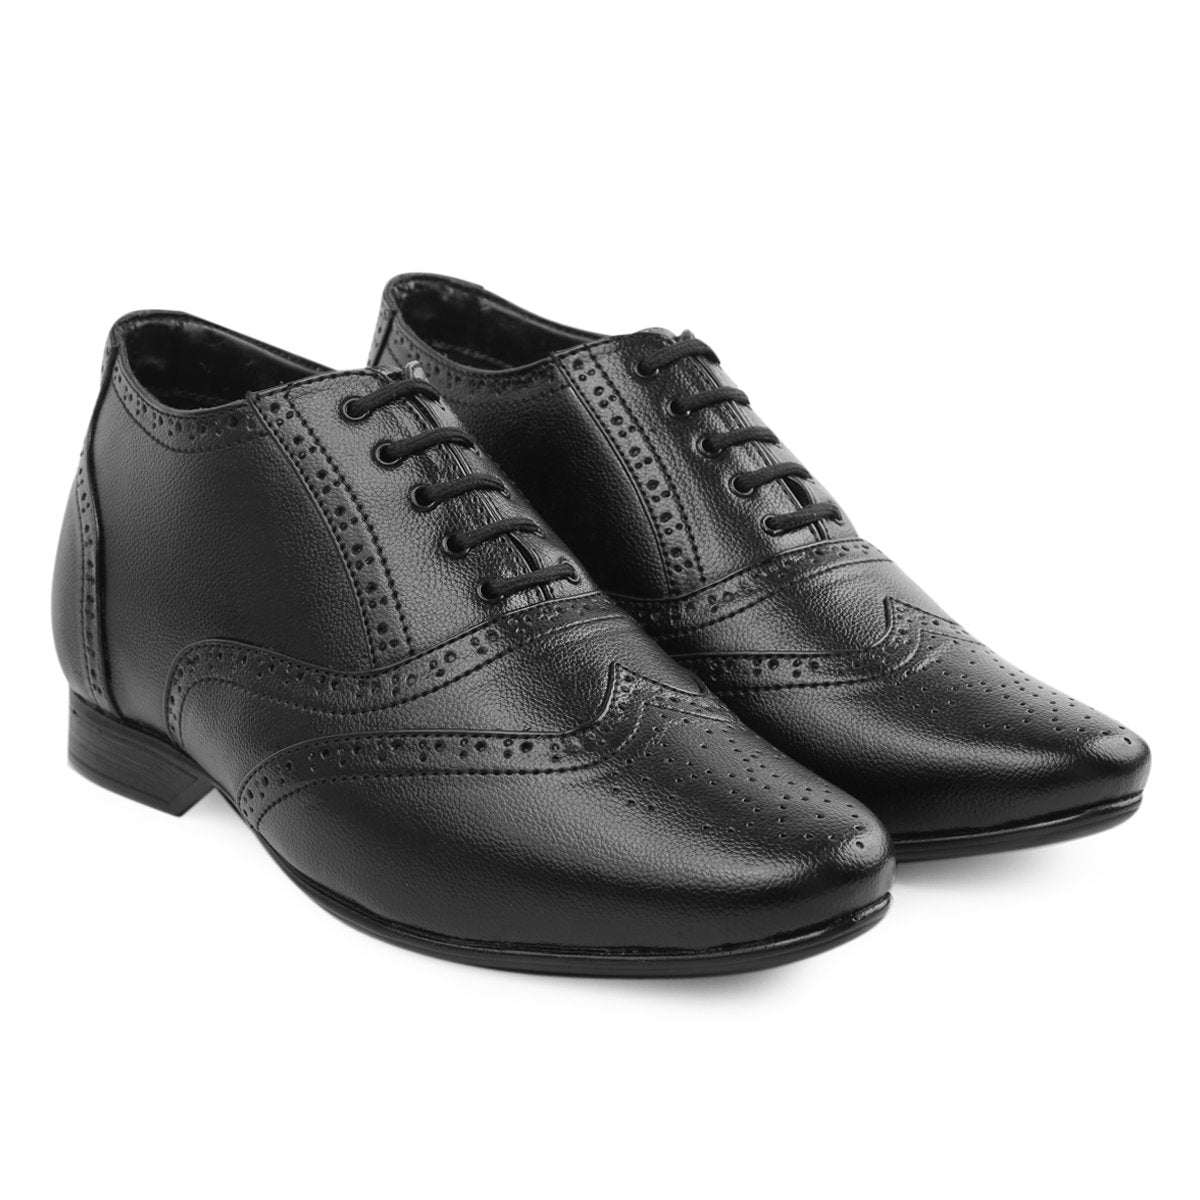 3 Inch Height Increasing Formal Faux Leather Brogue Oxford Shoes